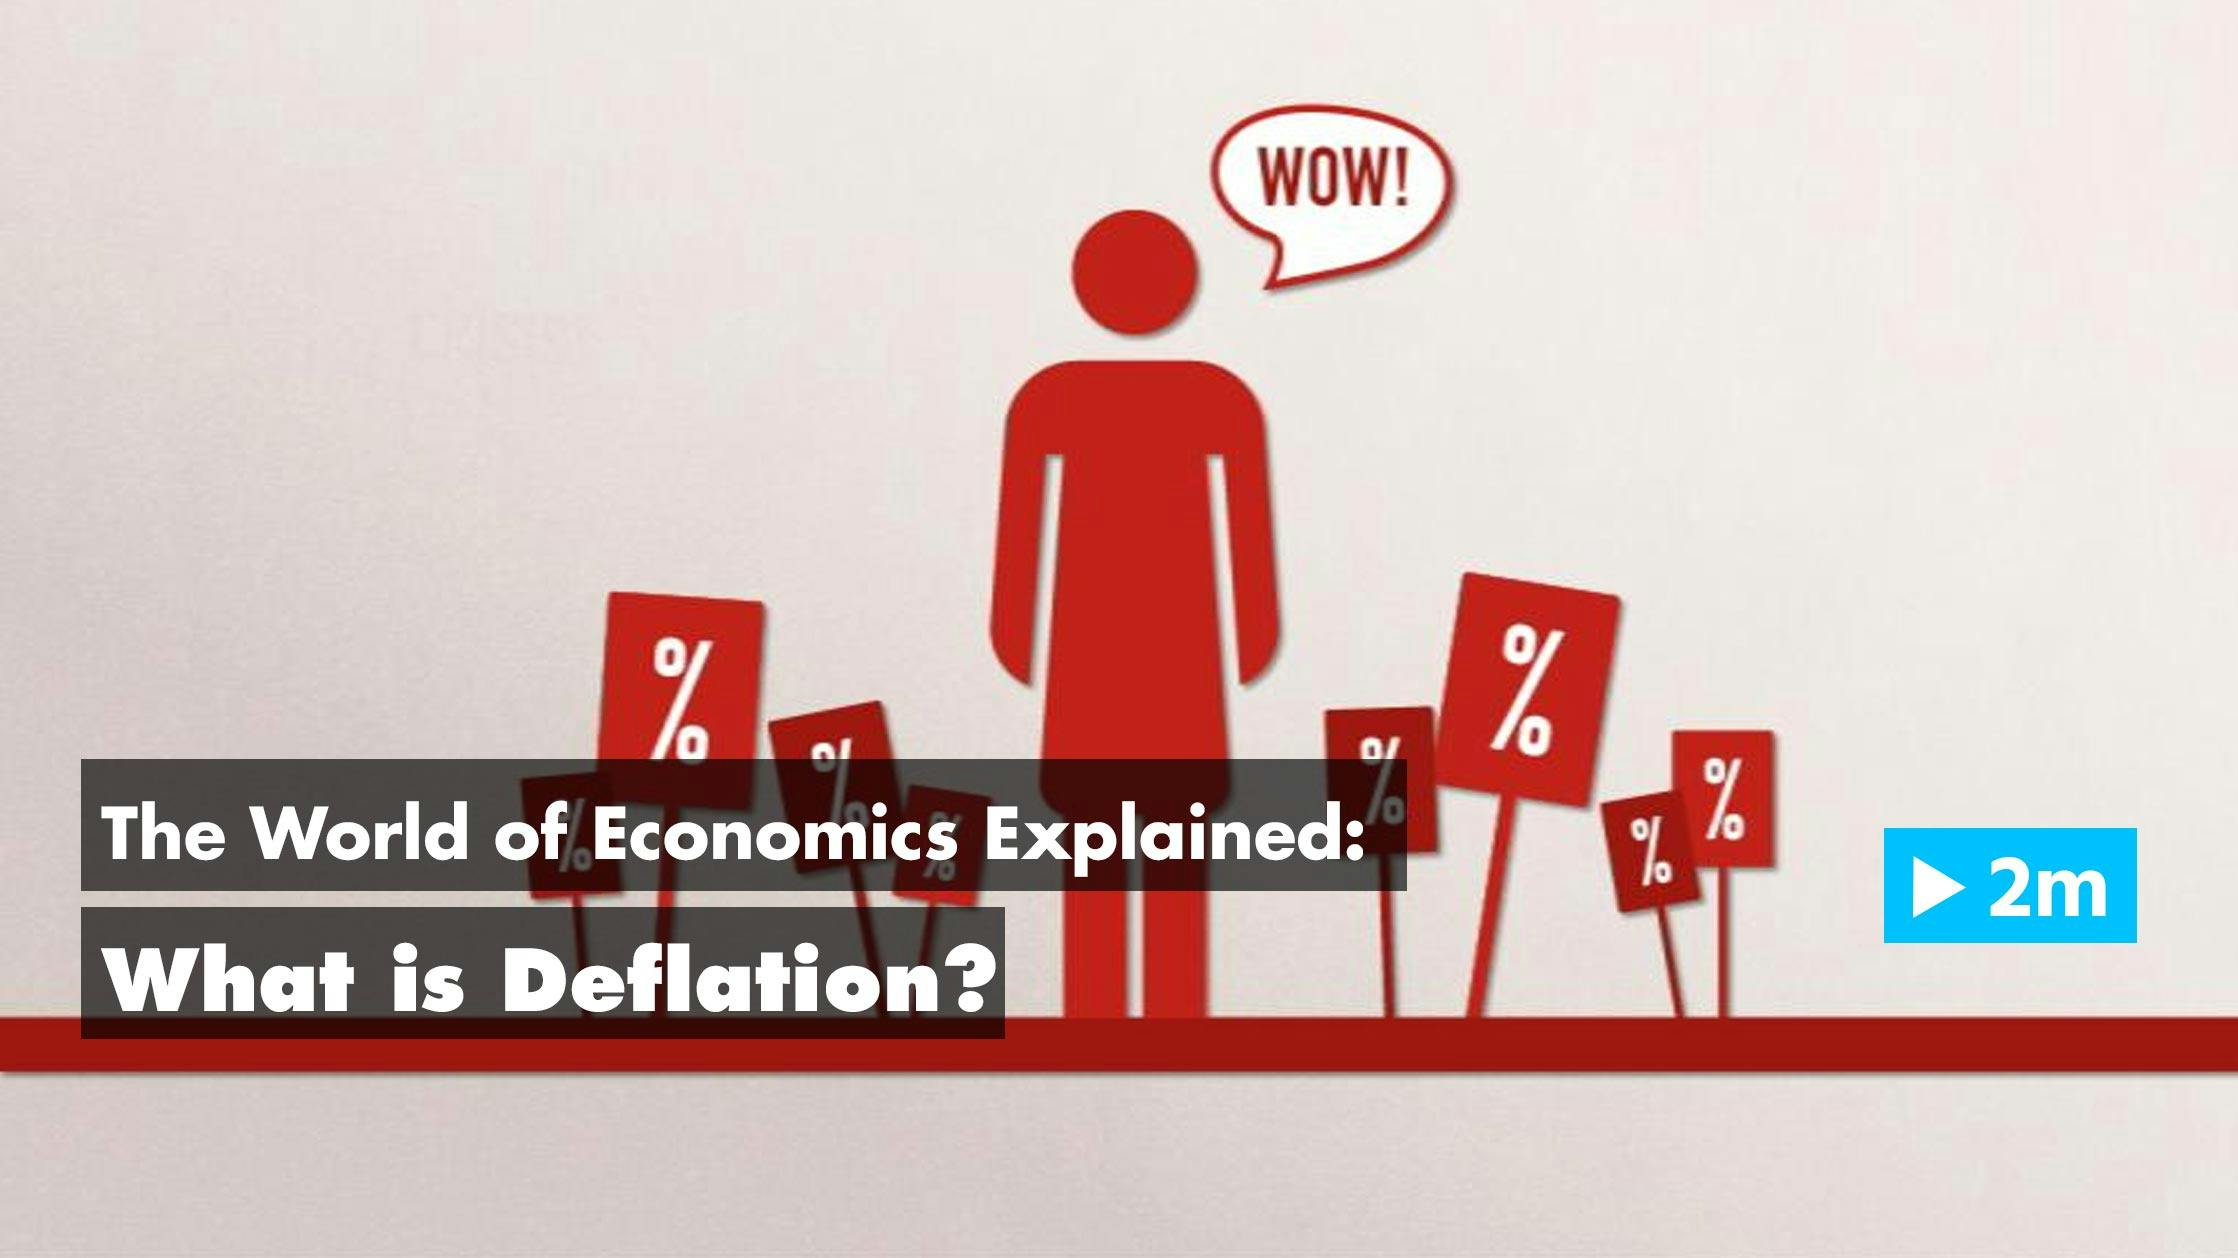 The World of Economics Explained: What is deflation?